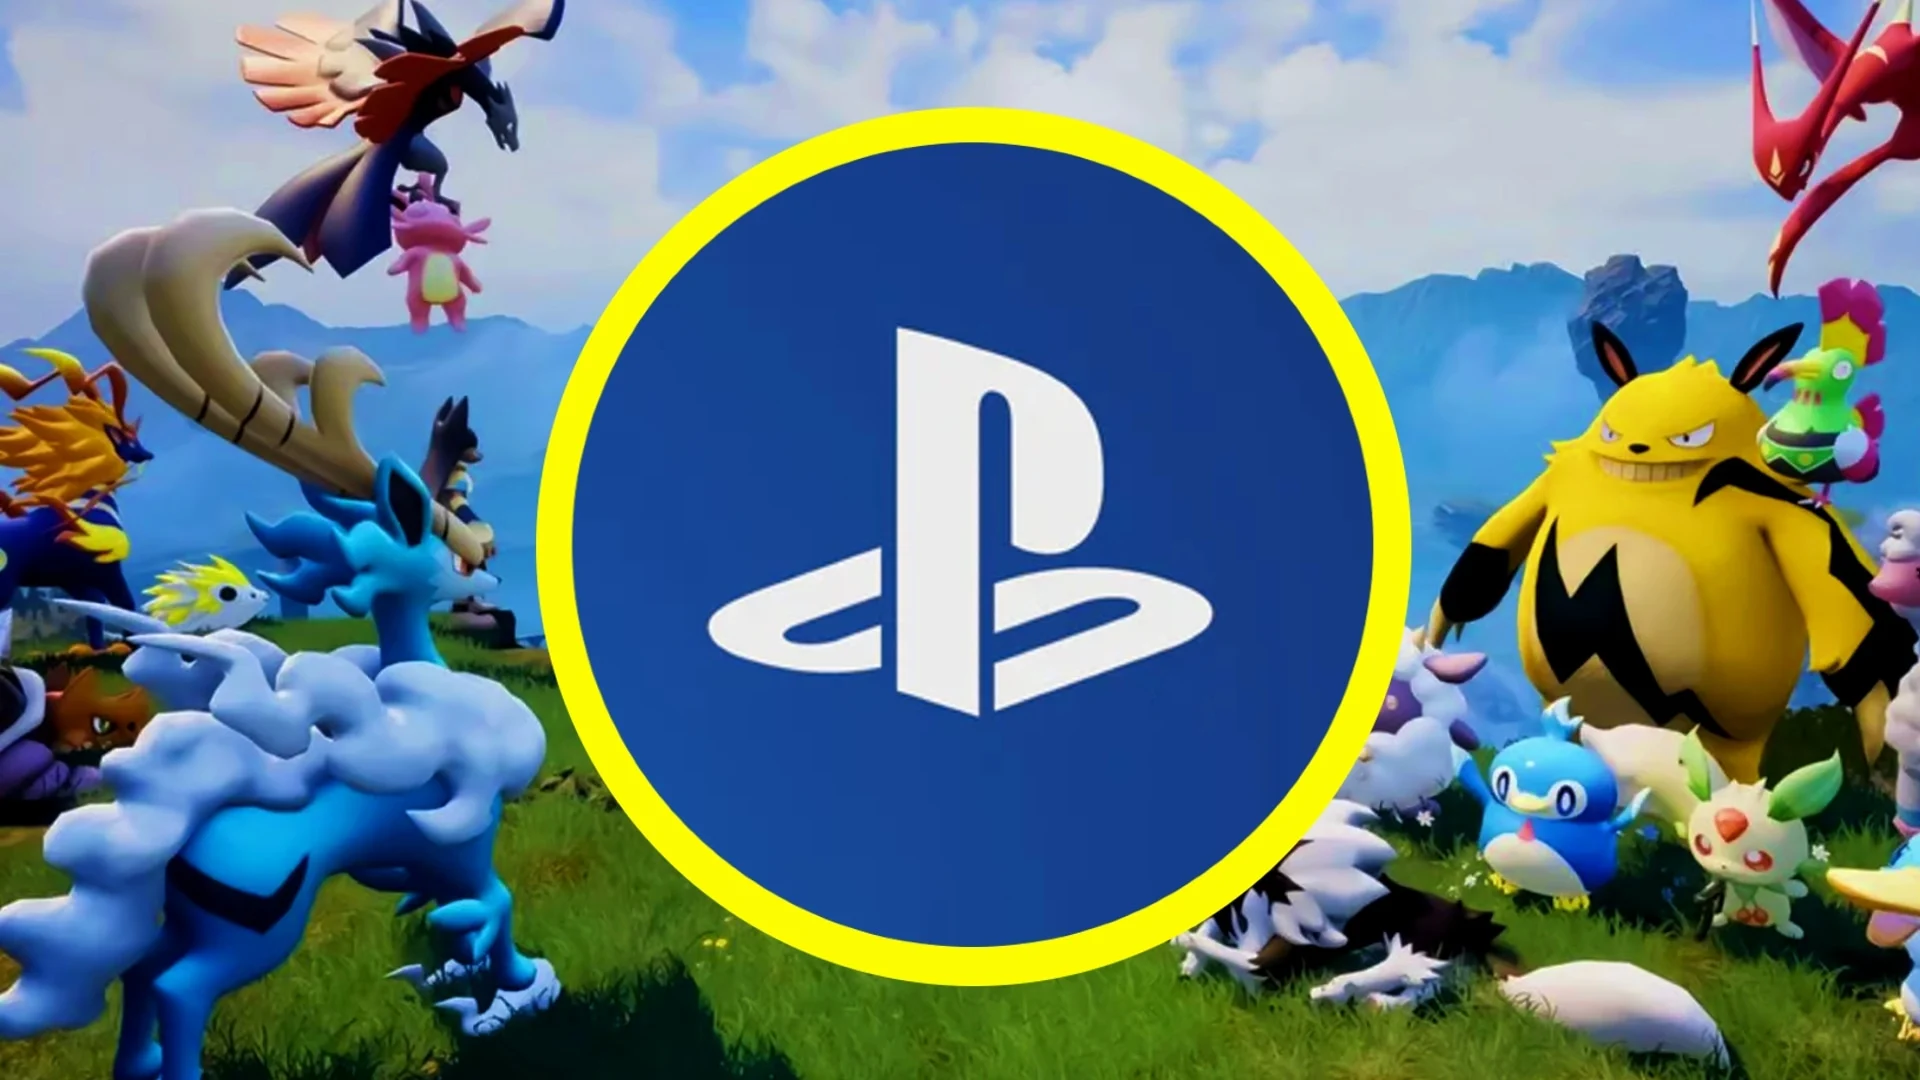 Palworld could be released on PlayStation in the future, making it truly cross platform